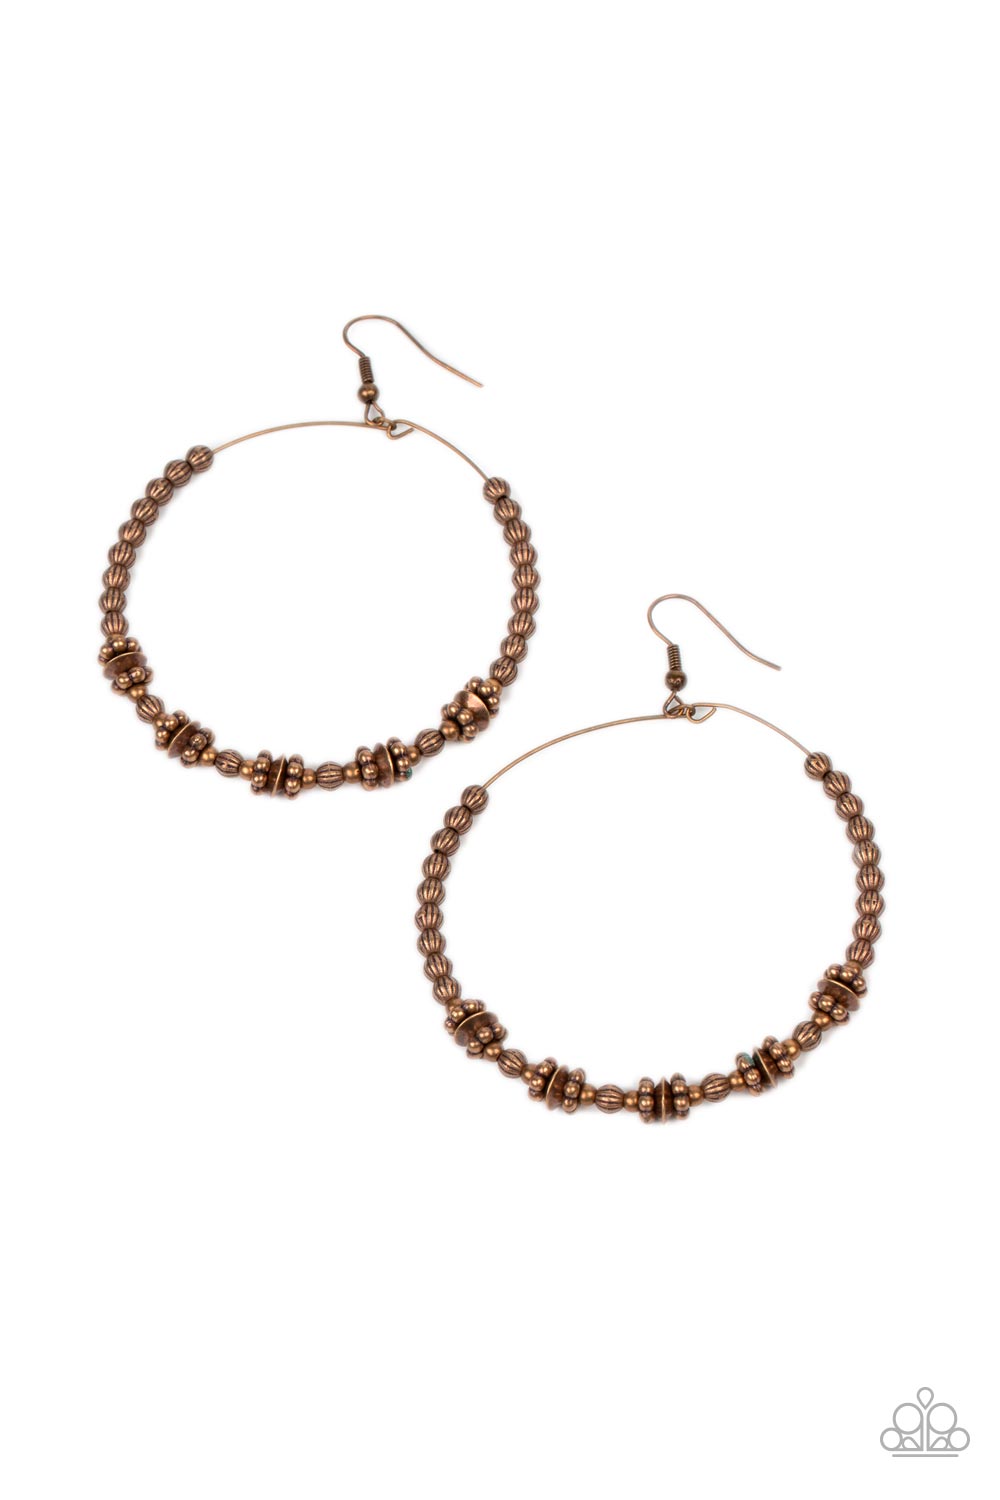 Paparazzi Earrings - Simple Synchrony - Copper